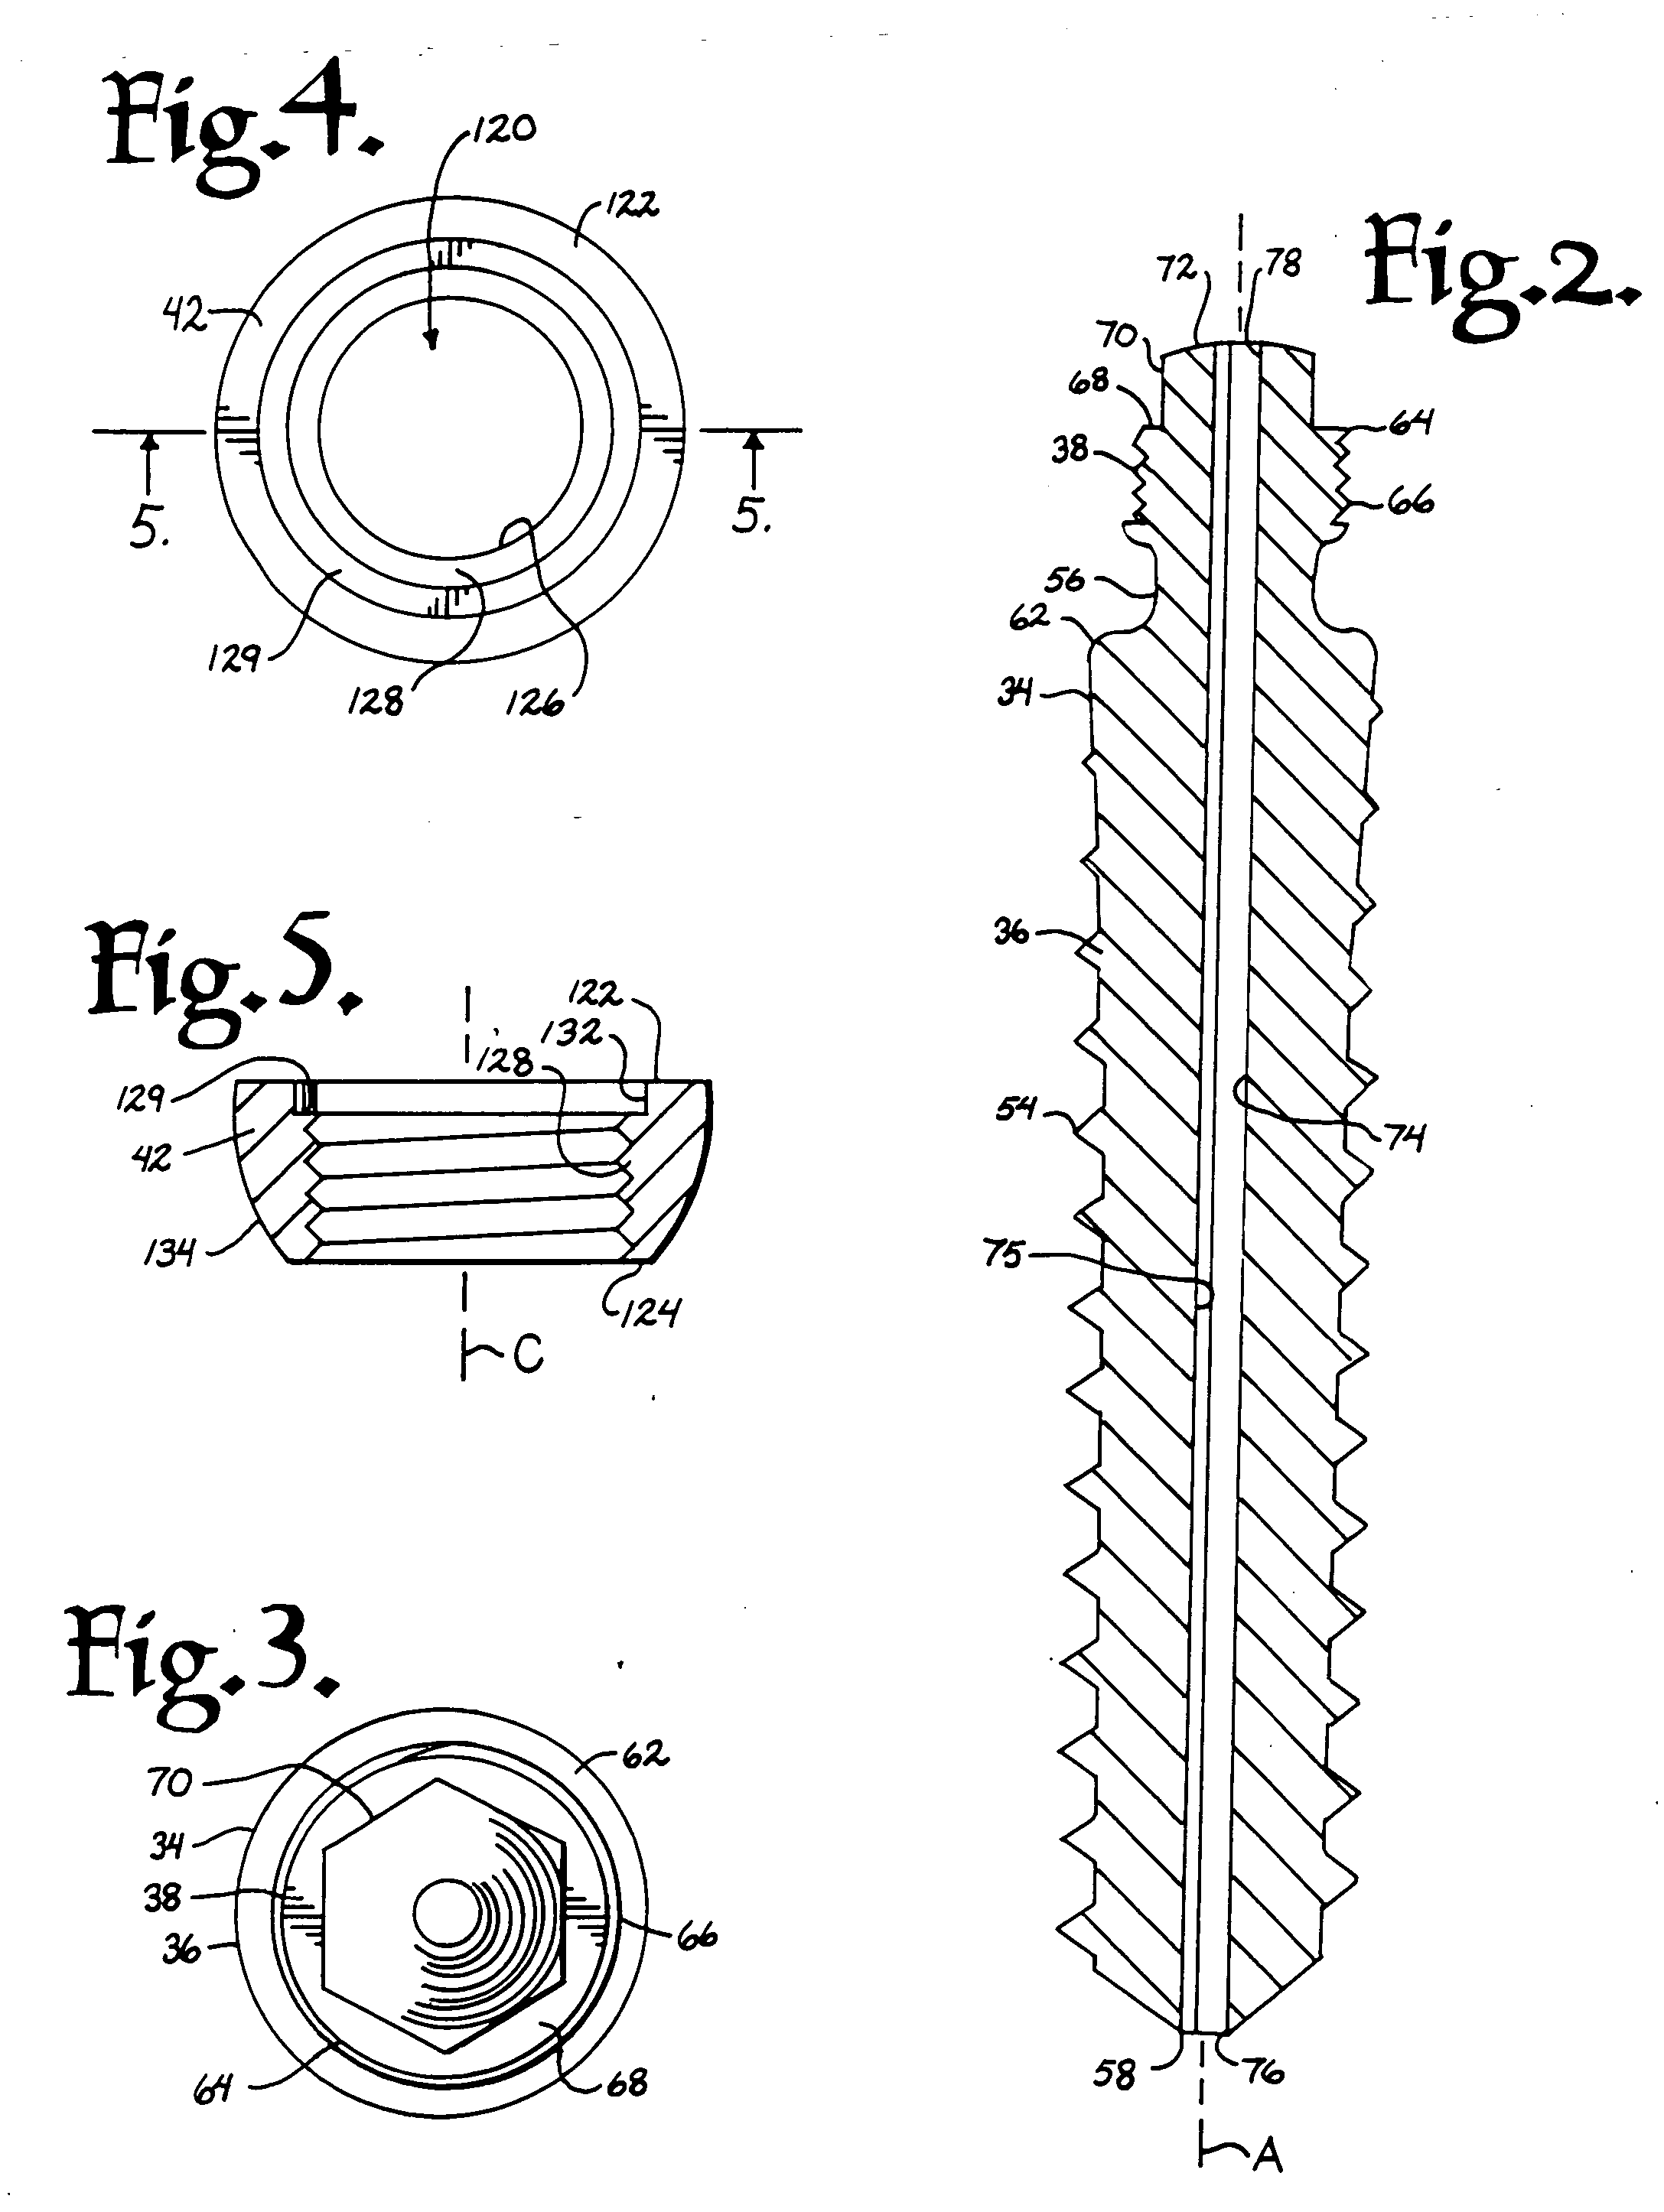 Helical reverse angle guide and advancement structure with break-off extensions